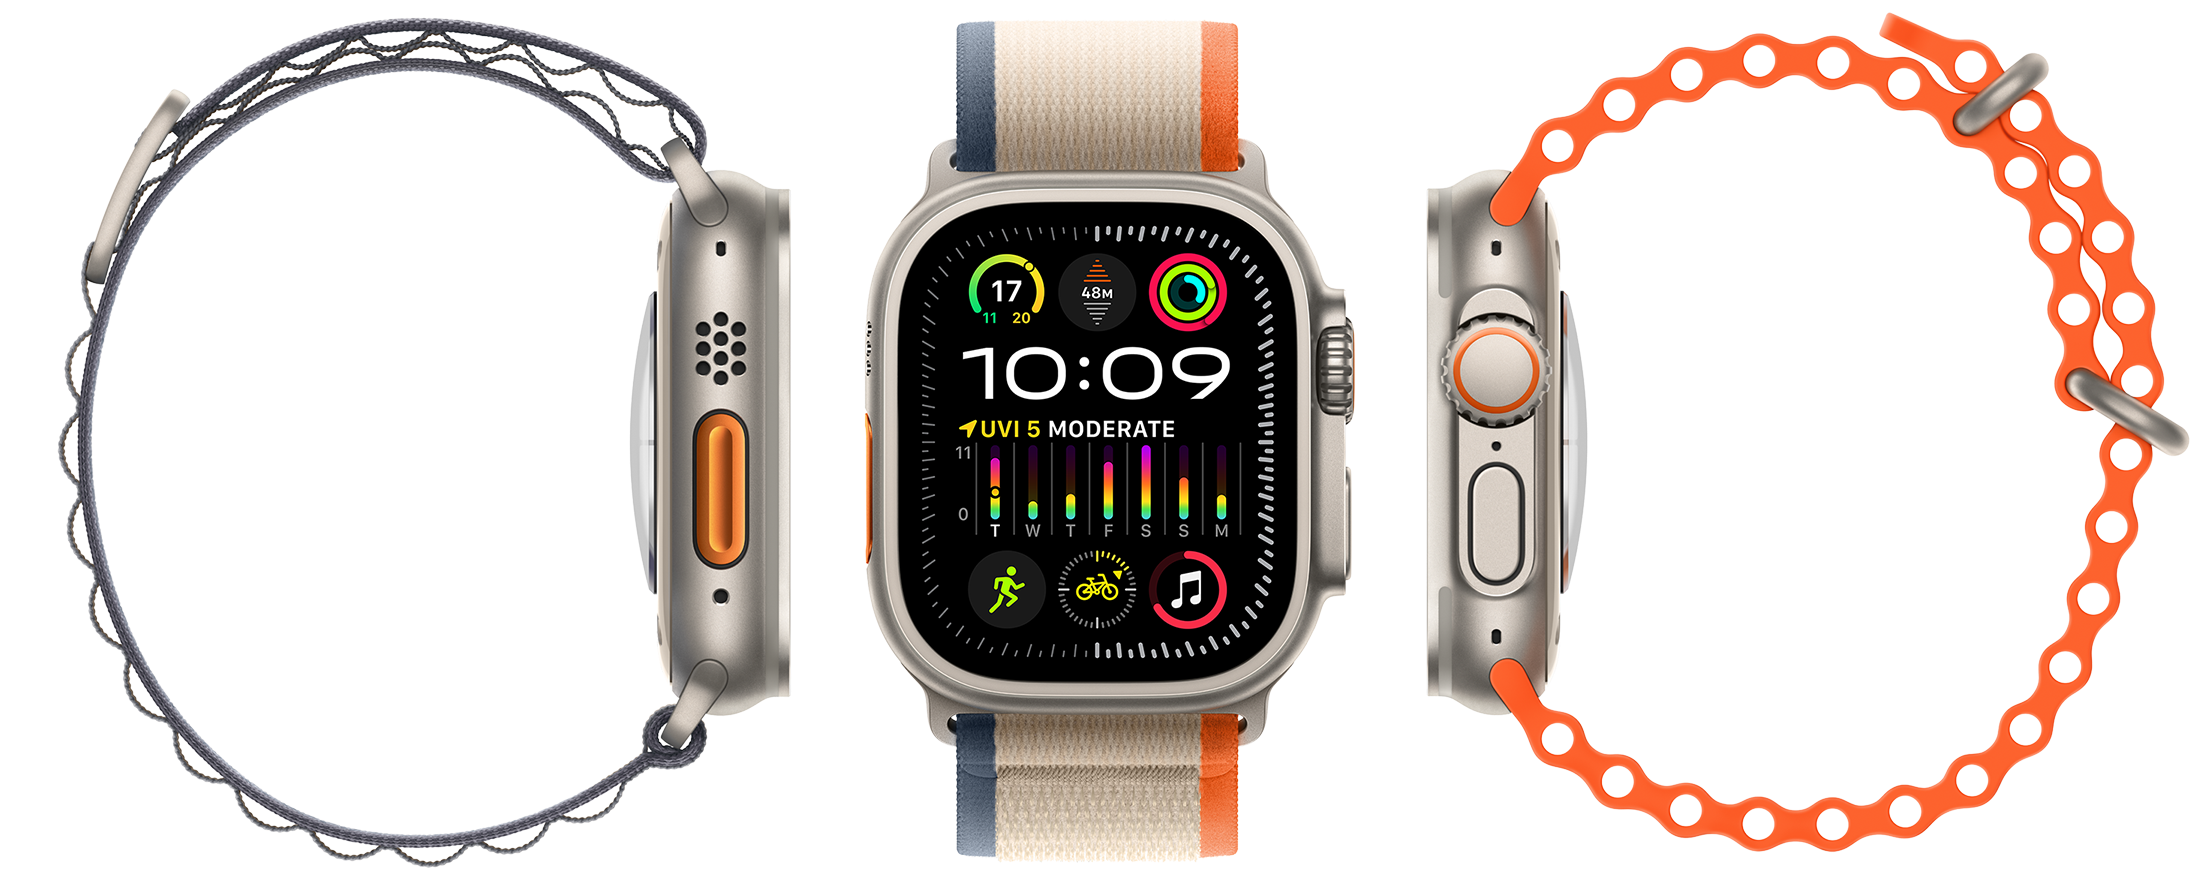 Apple Watch Ultra 2 showing compatibility with three different band types, large display, rugged titanium case, orange action button, and digital crown